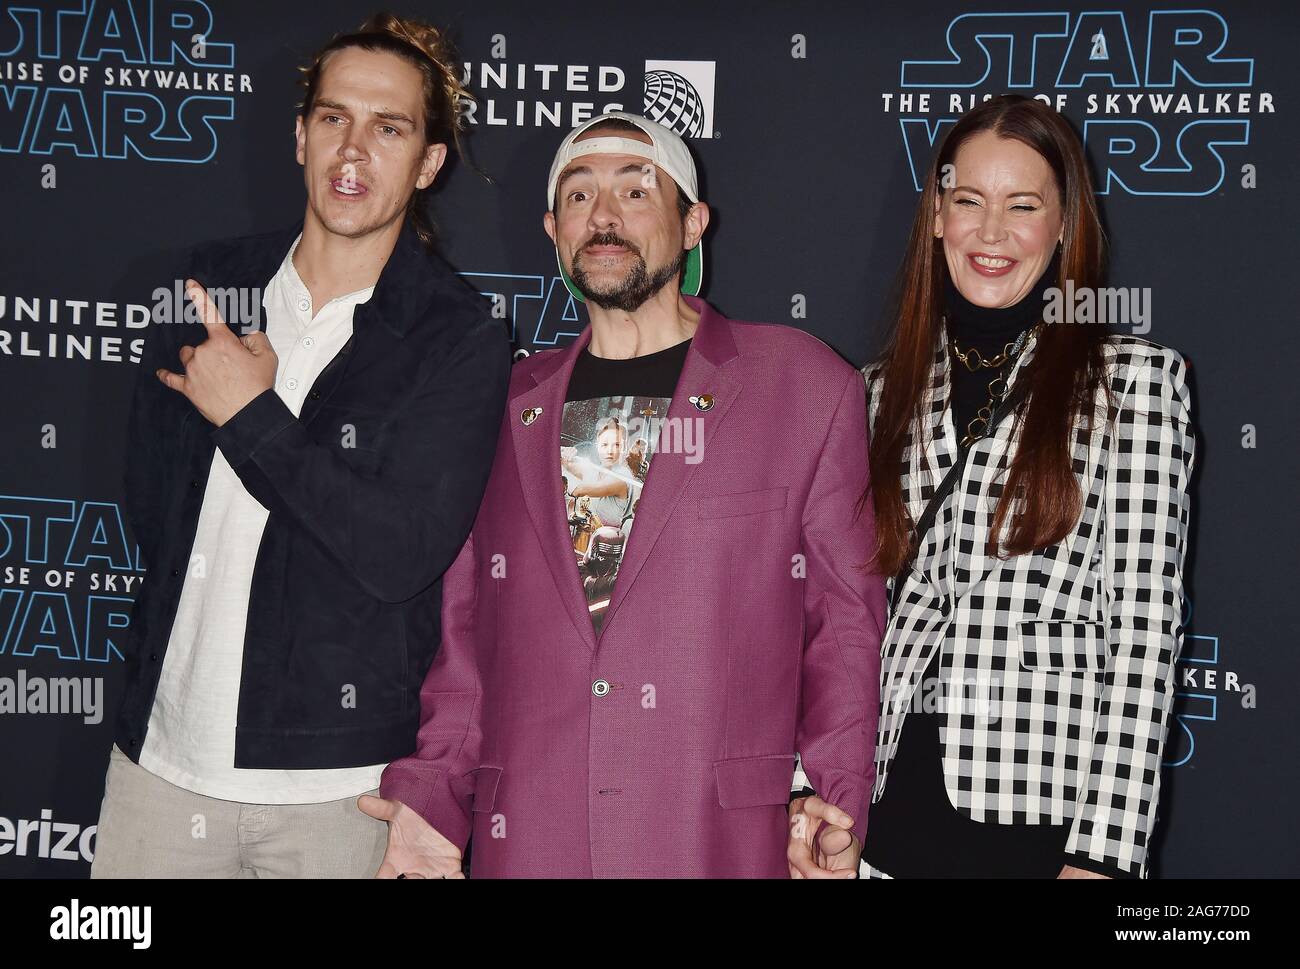 HOLLYWOOD, CA - DECEMBER 16: (L-R) Jason Mewes, Kevin Smith and Jennifer Schwalbach attend the Premiere of Disney's 'Star Wars: The Rise Of Skywalker' at the El Capitan Theatre on December 16, 2019 in Hollywood, California. Stock Photo